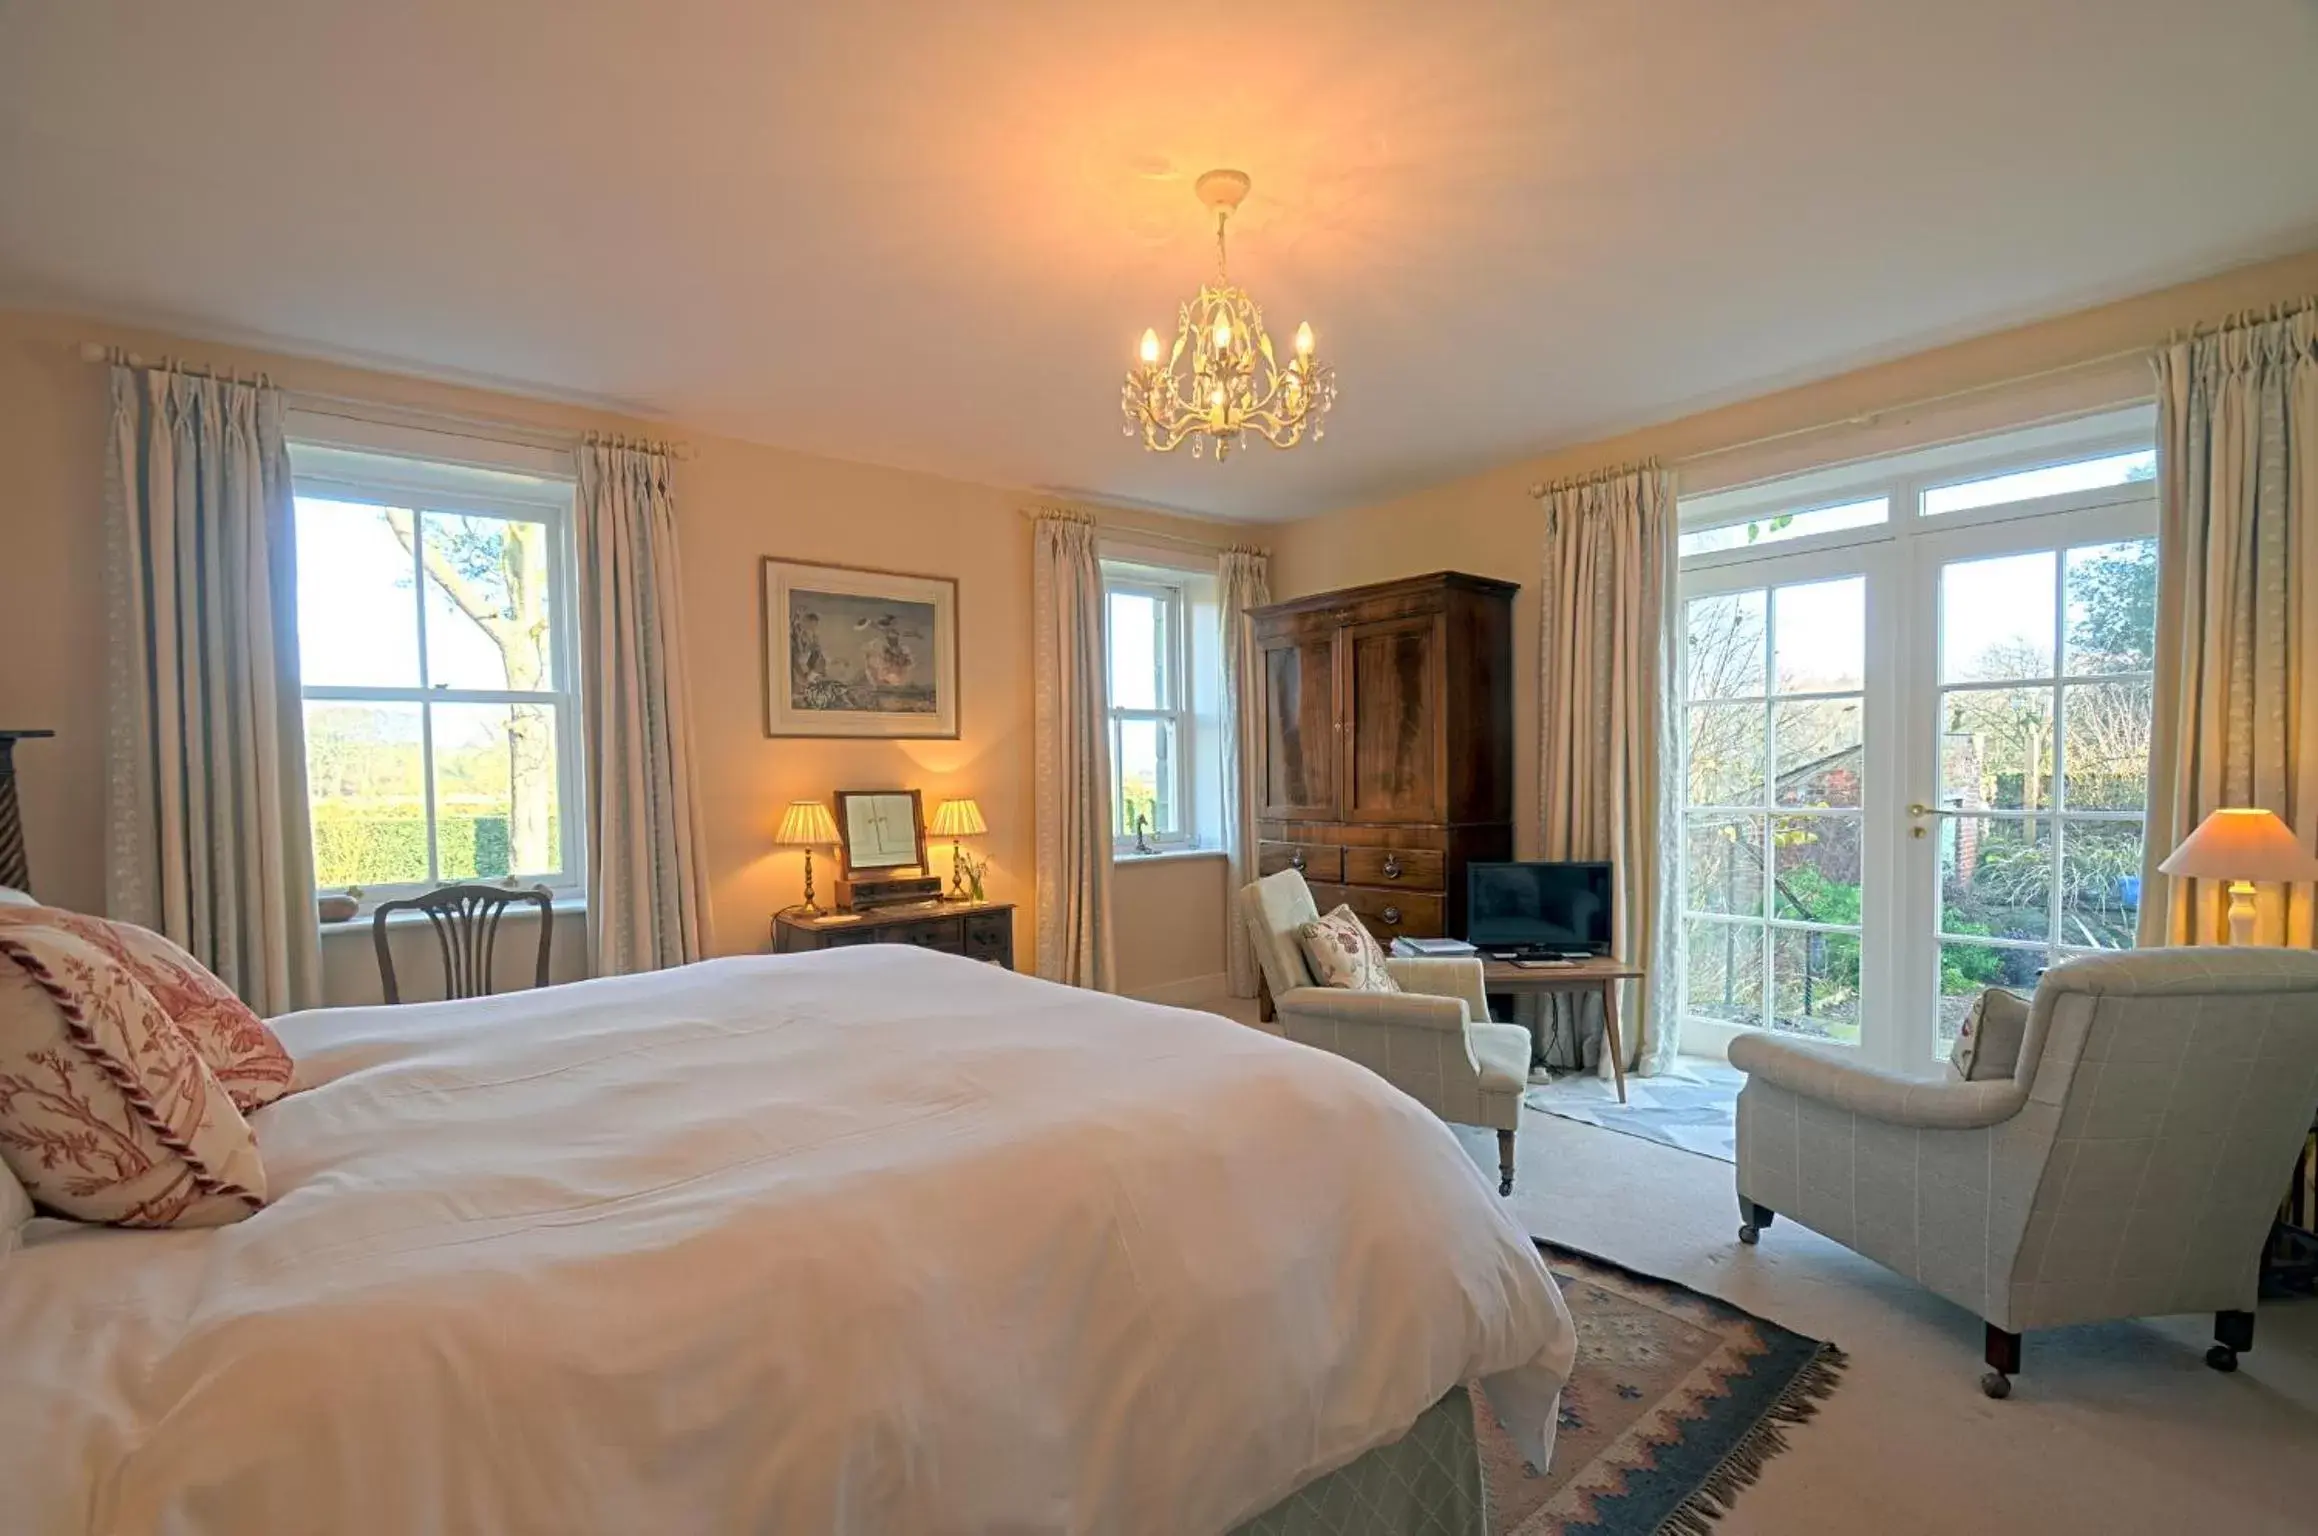 King Room with Garden View in Ingram House Bed & Breakfast